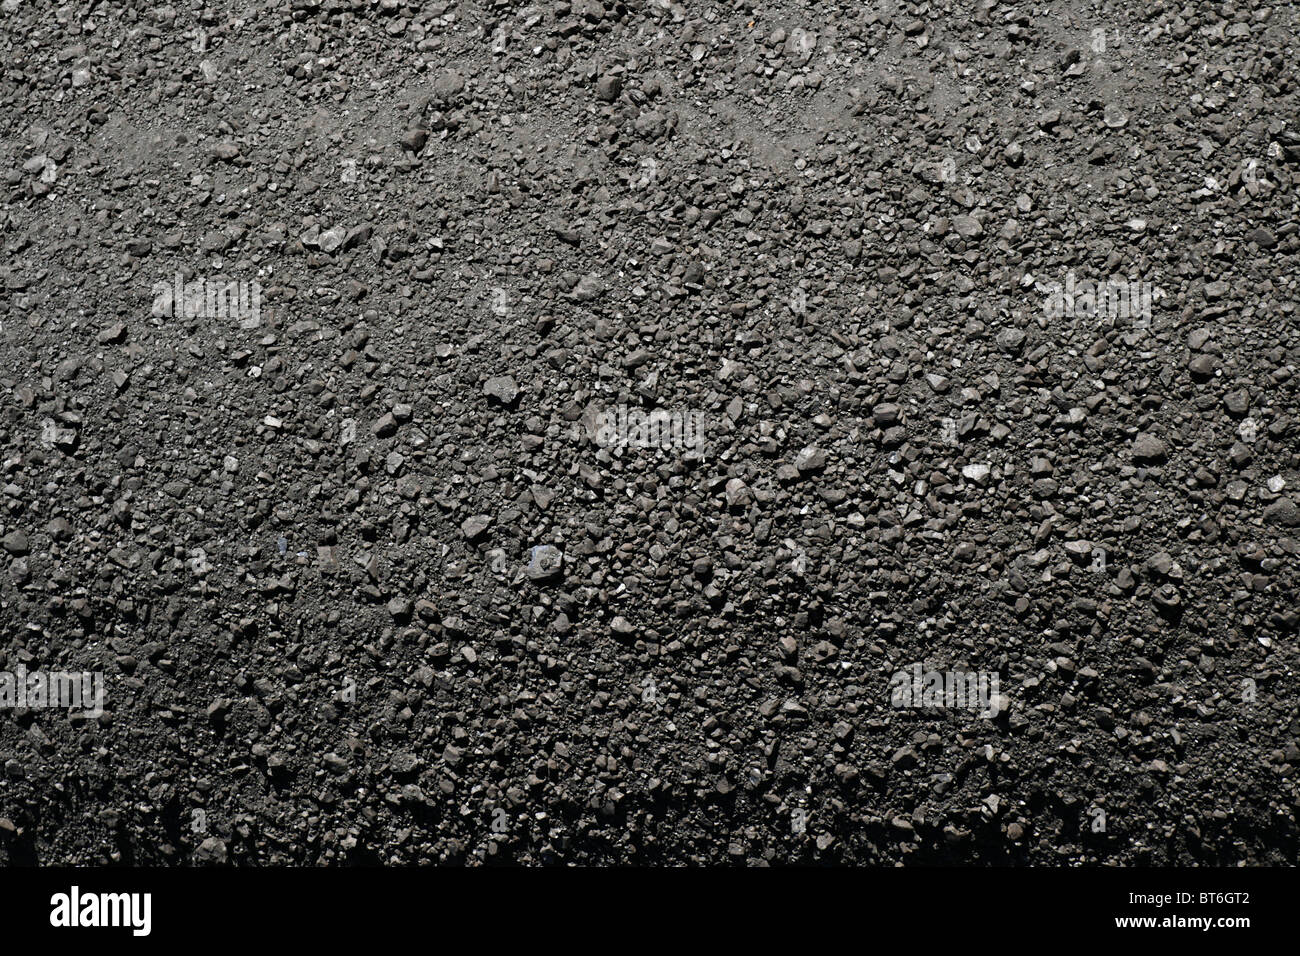 background image of a coal pile taken from above Stock Photo